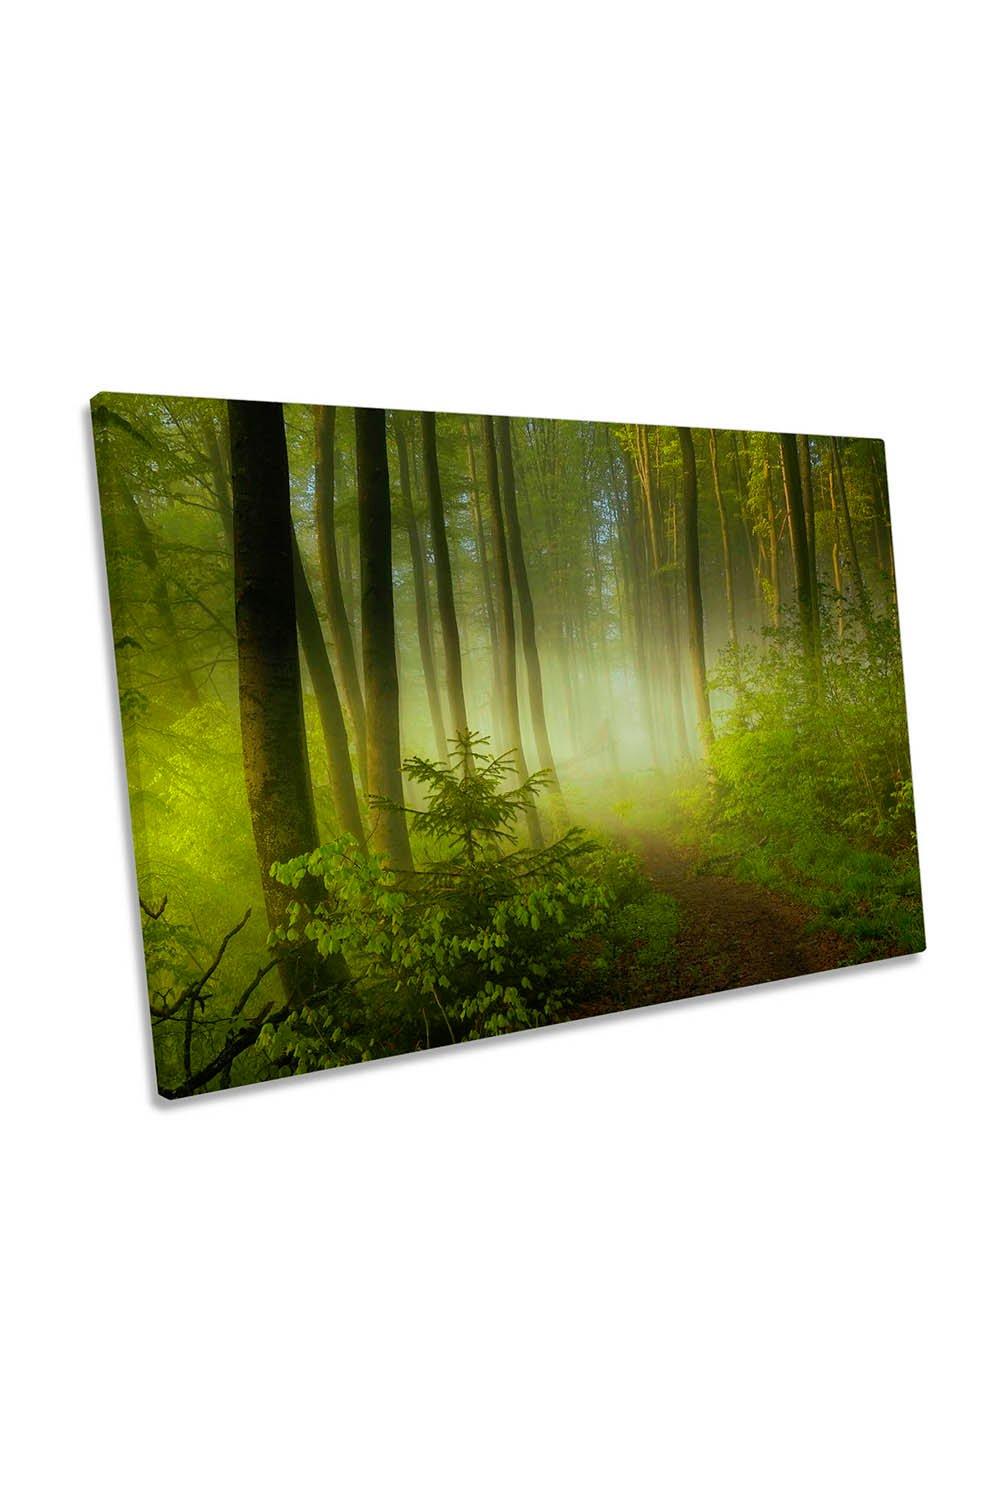 Early Fall Forest Misty Landscape Green Canvas Wall Art Picture Print